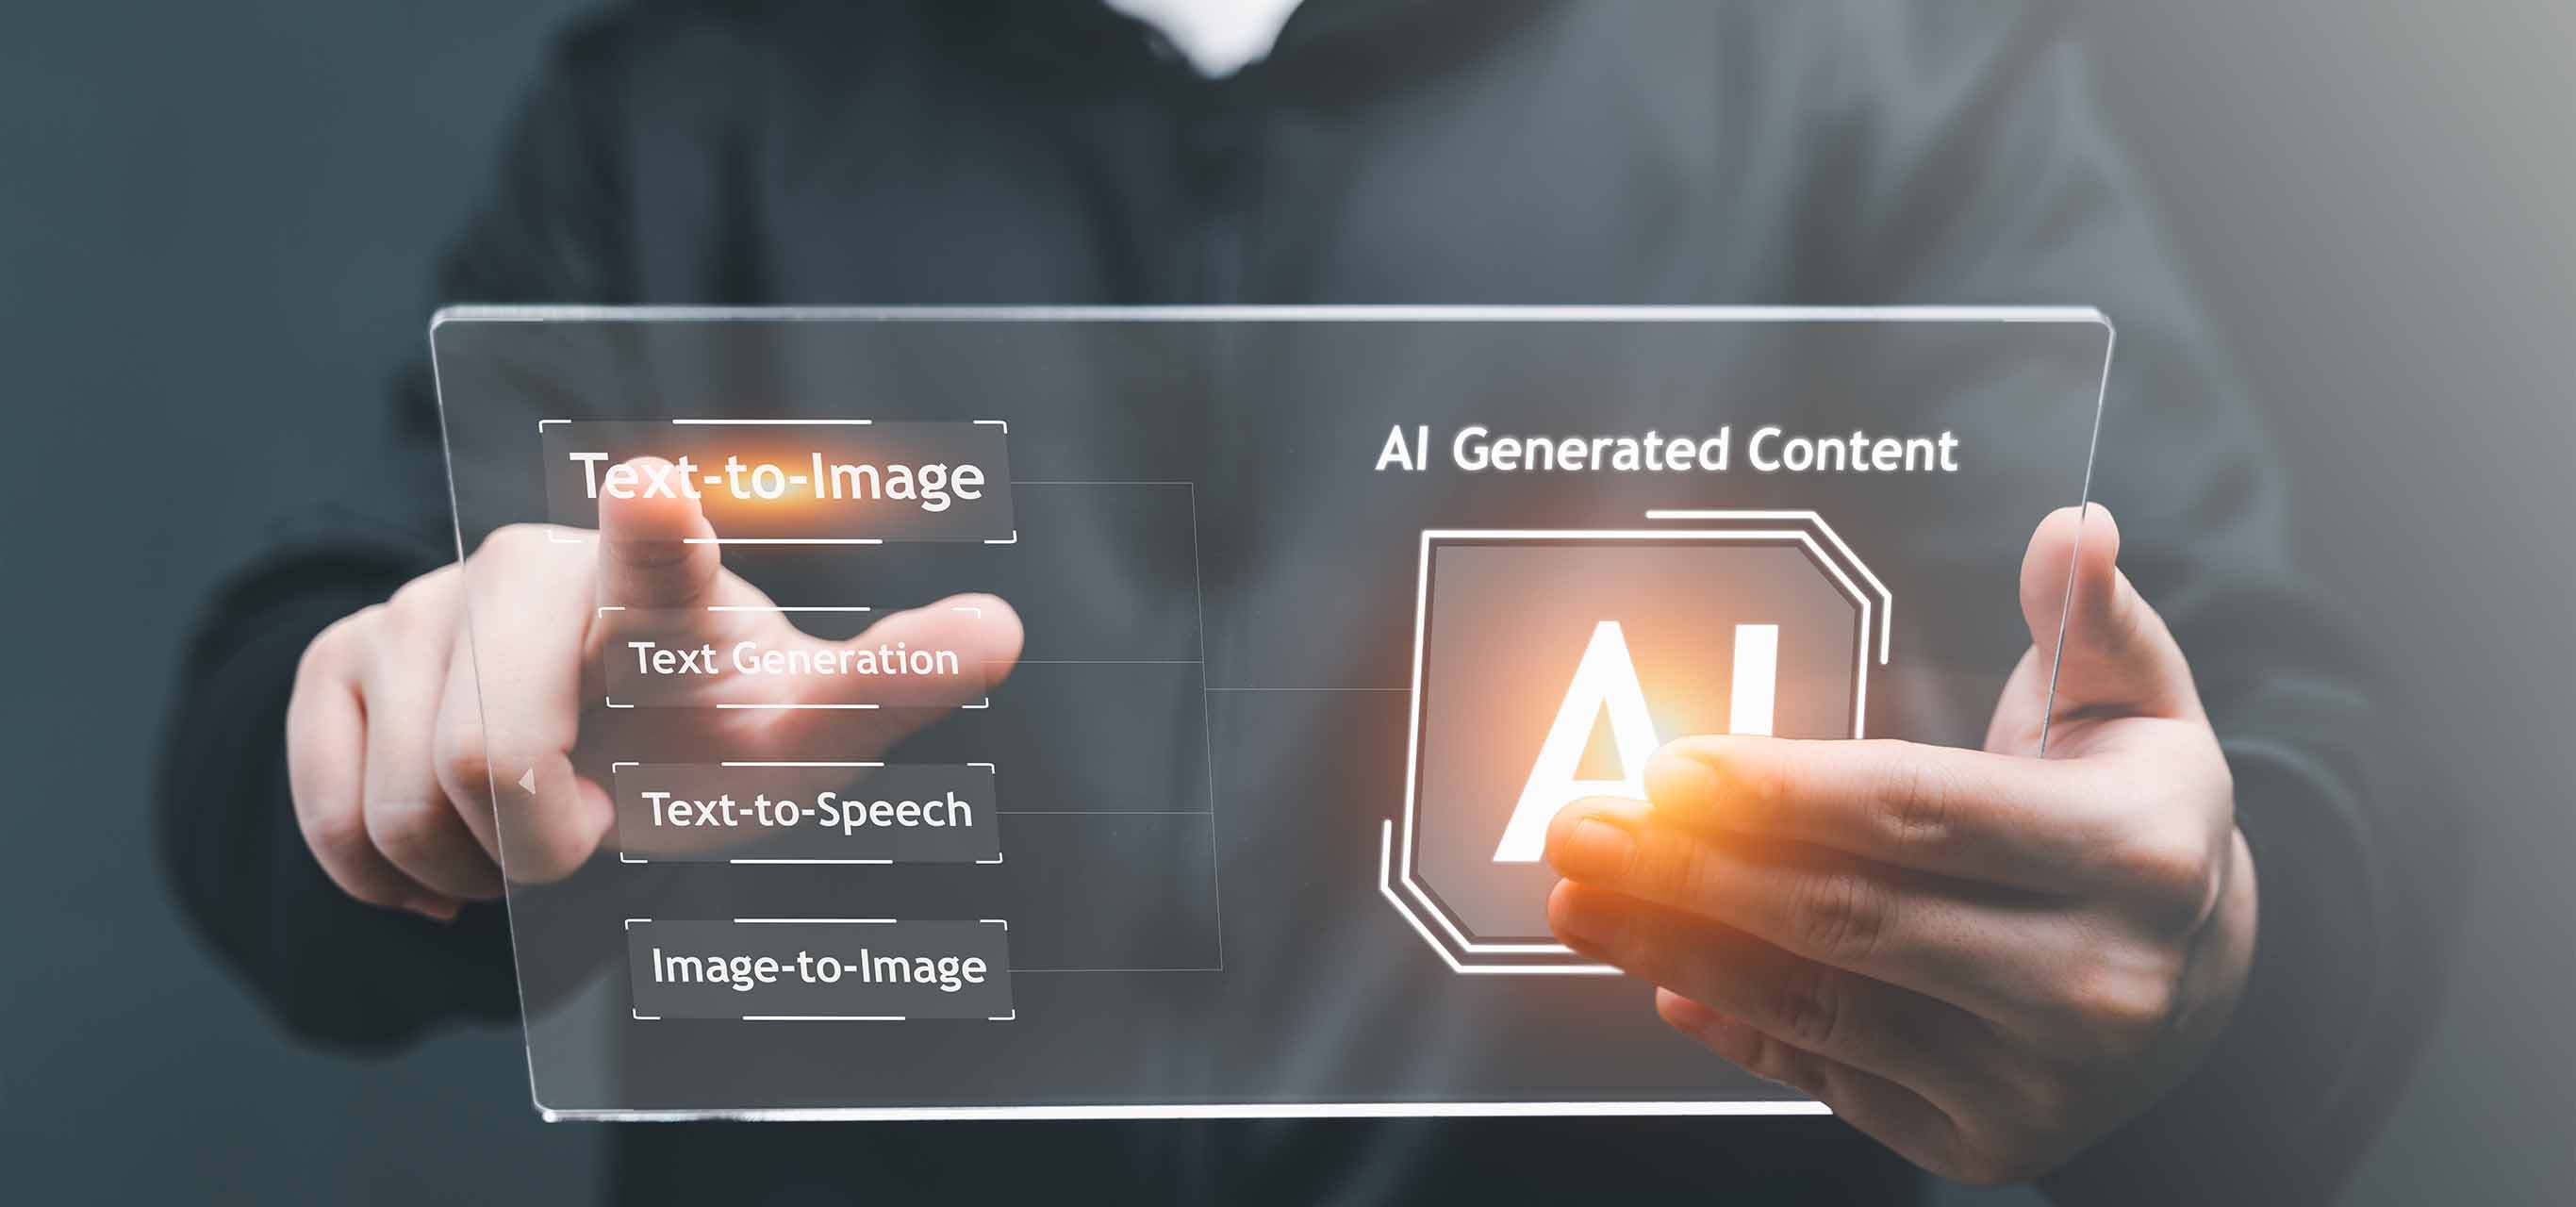 How Can We Enhance User Experience Through Generative AI?